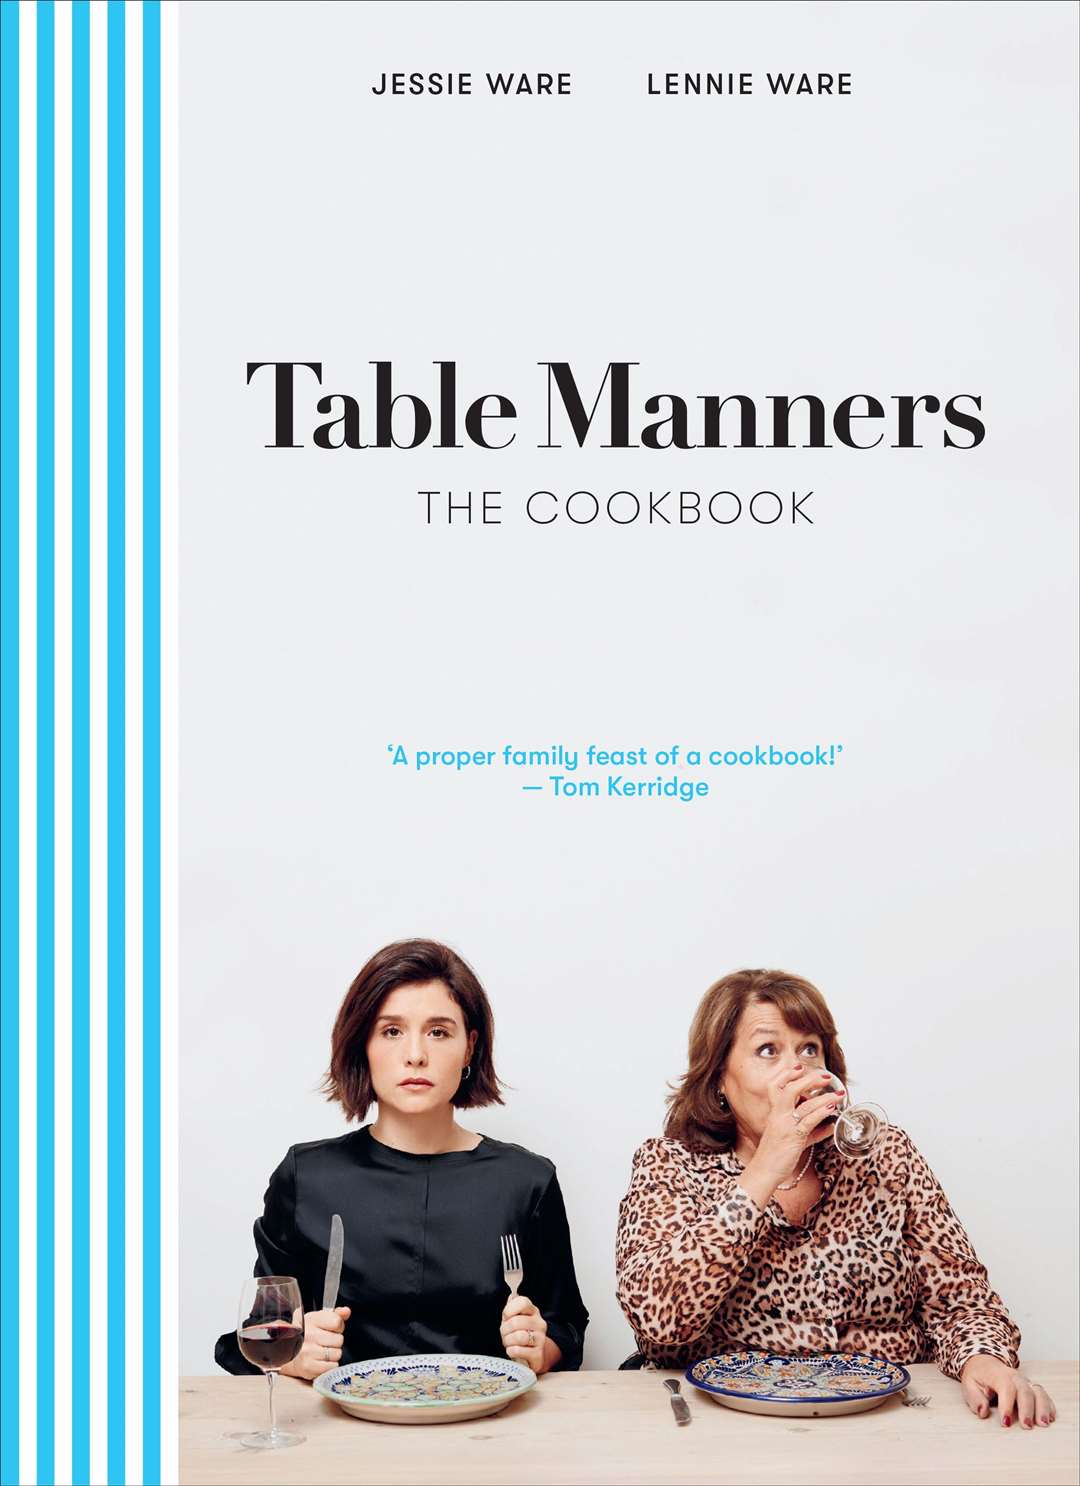 Table Manners: The Cookbook by Jessie and Lennie Ware (Ebury Press, £22). Picture: Ola O Smit/PA